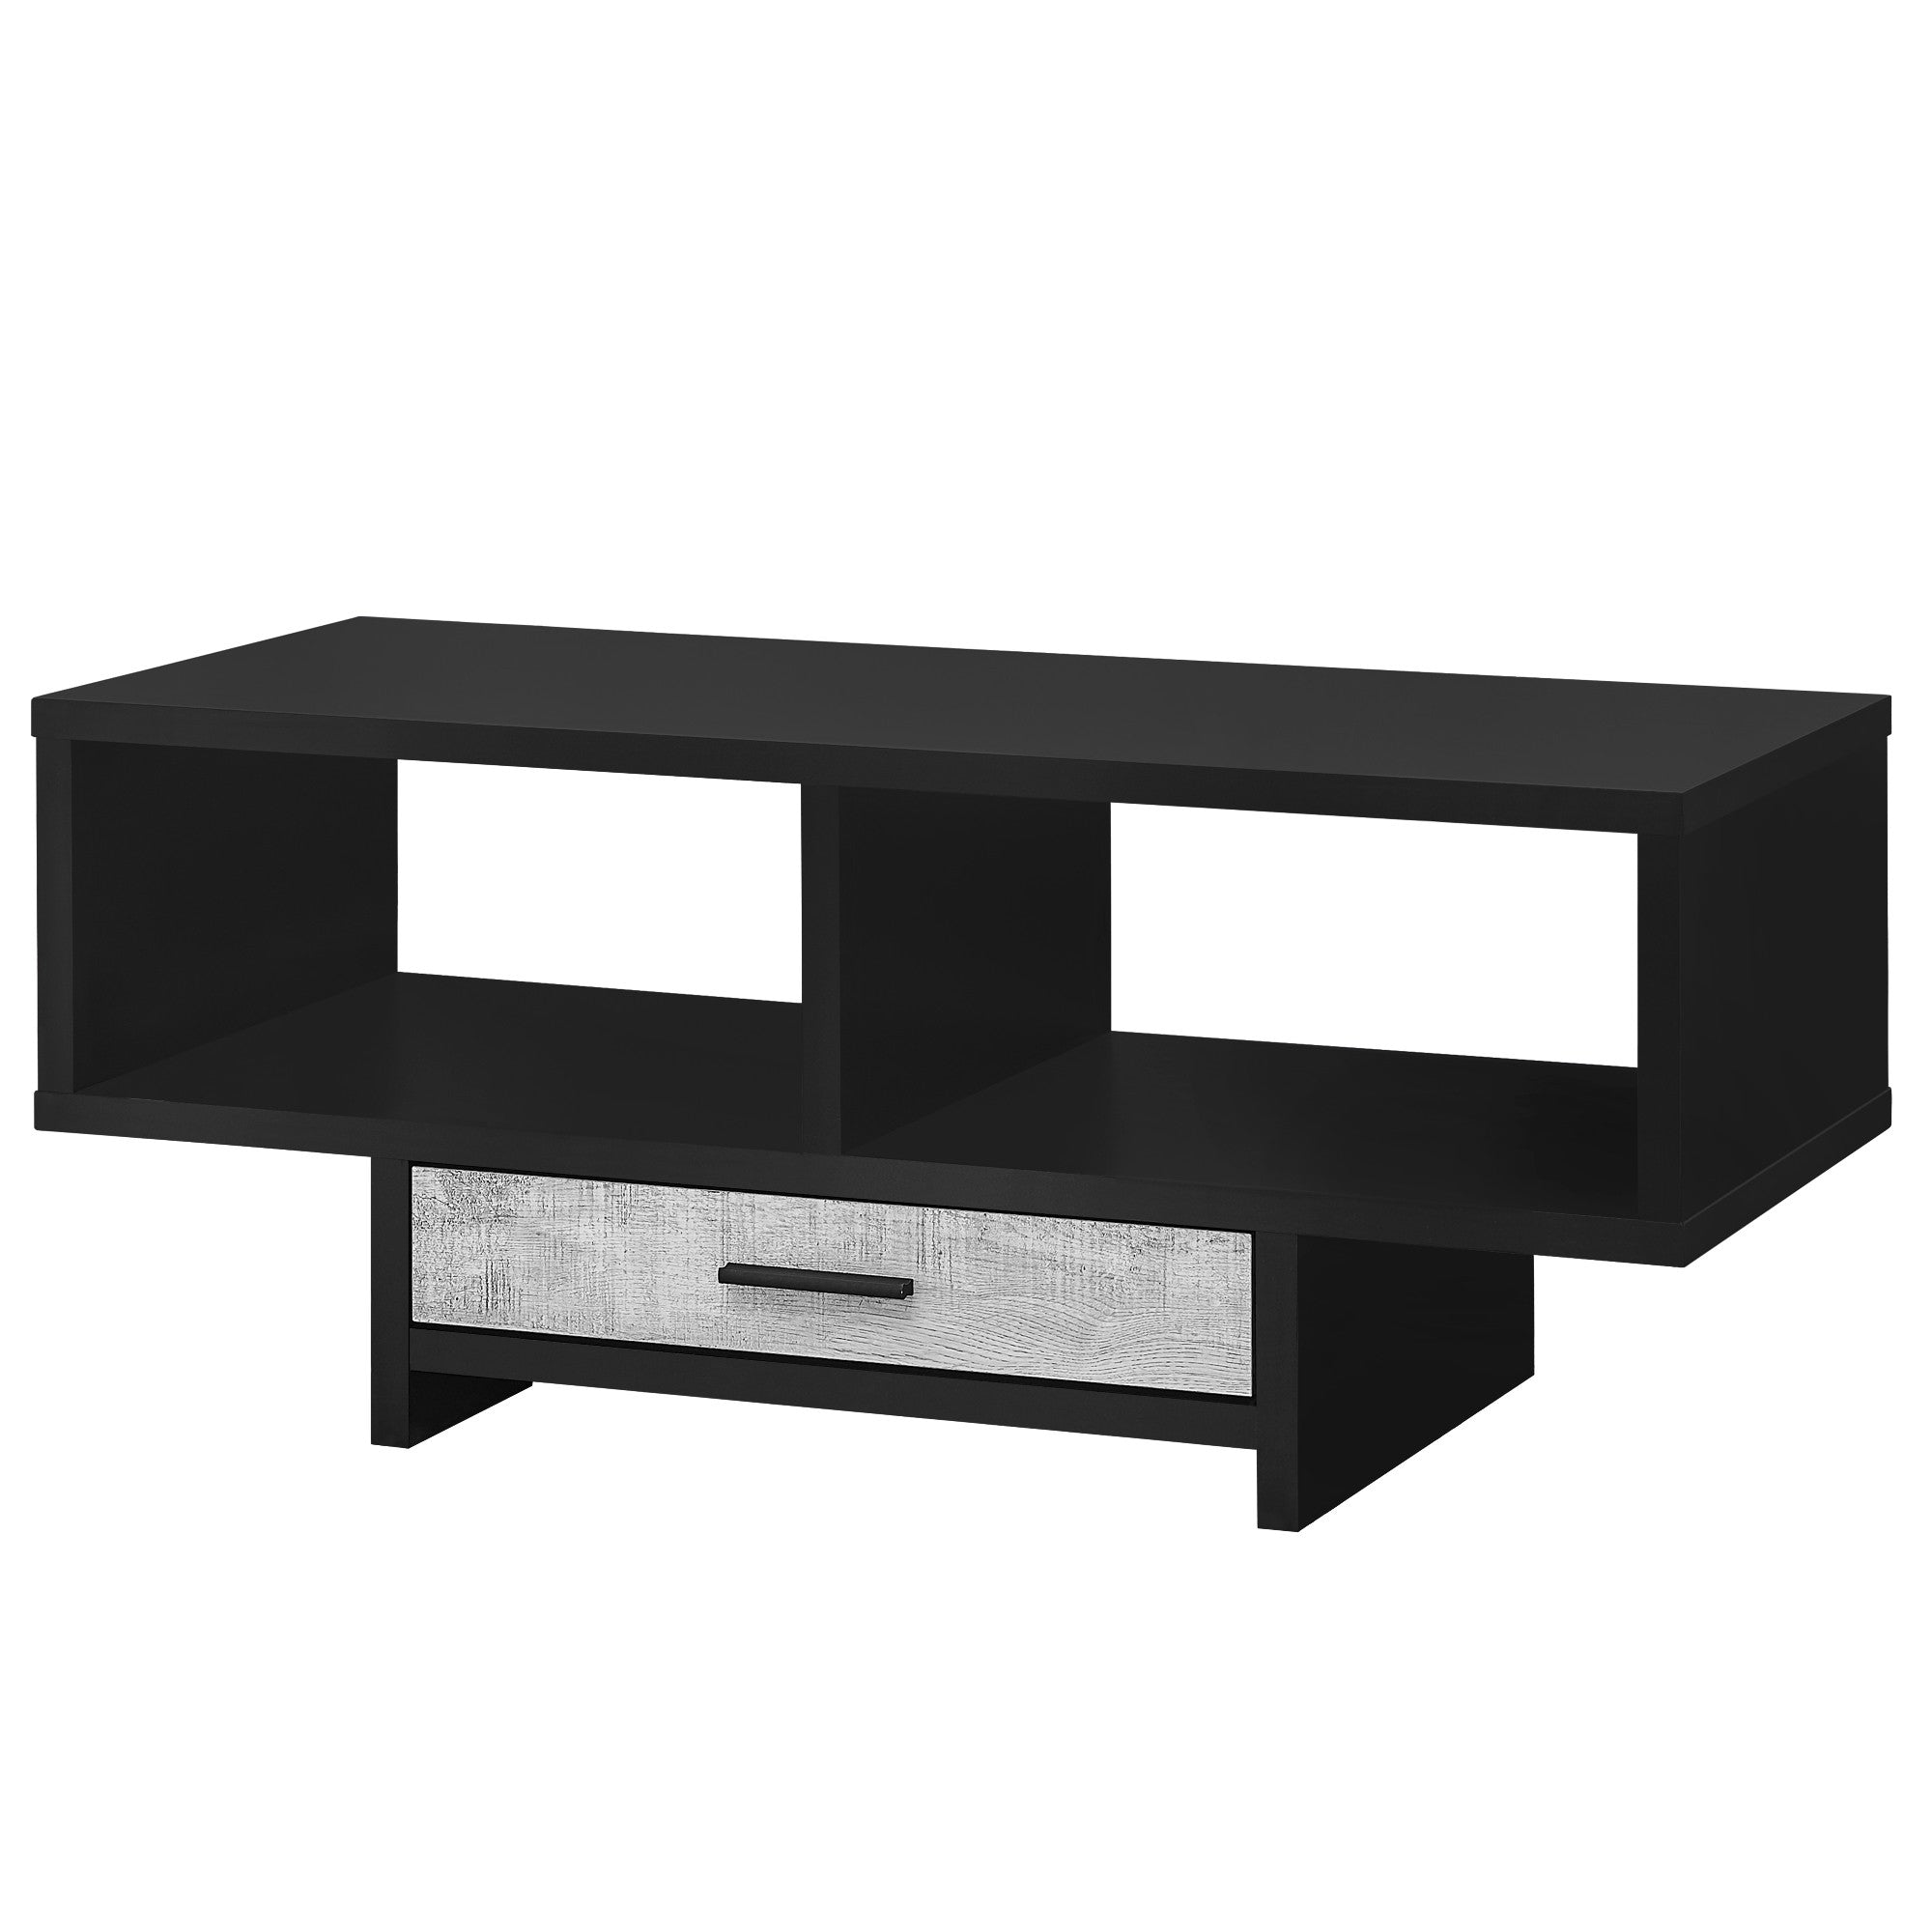 42" Black And Gray Coffee Table With Drawer And Two Shelves